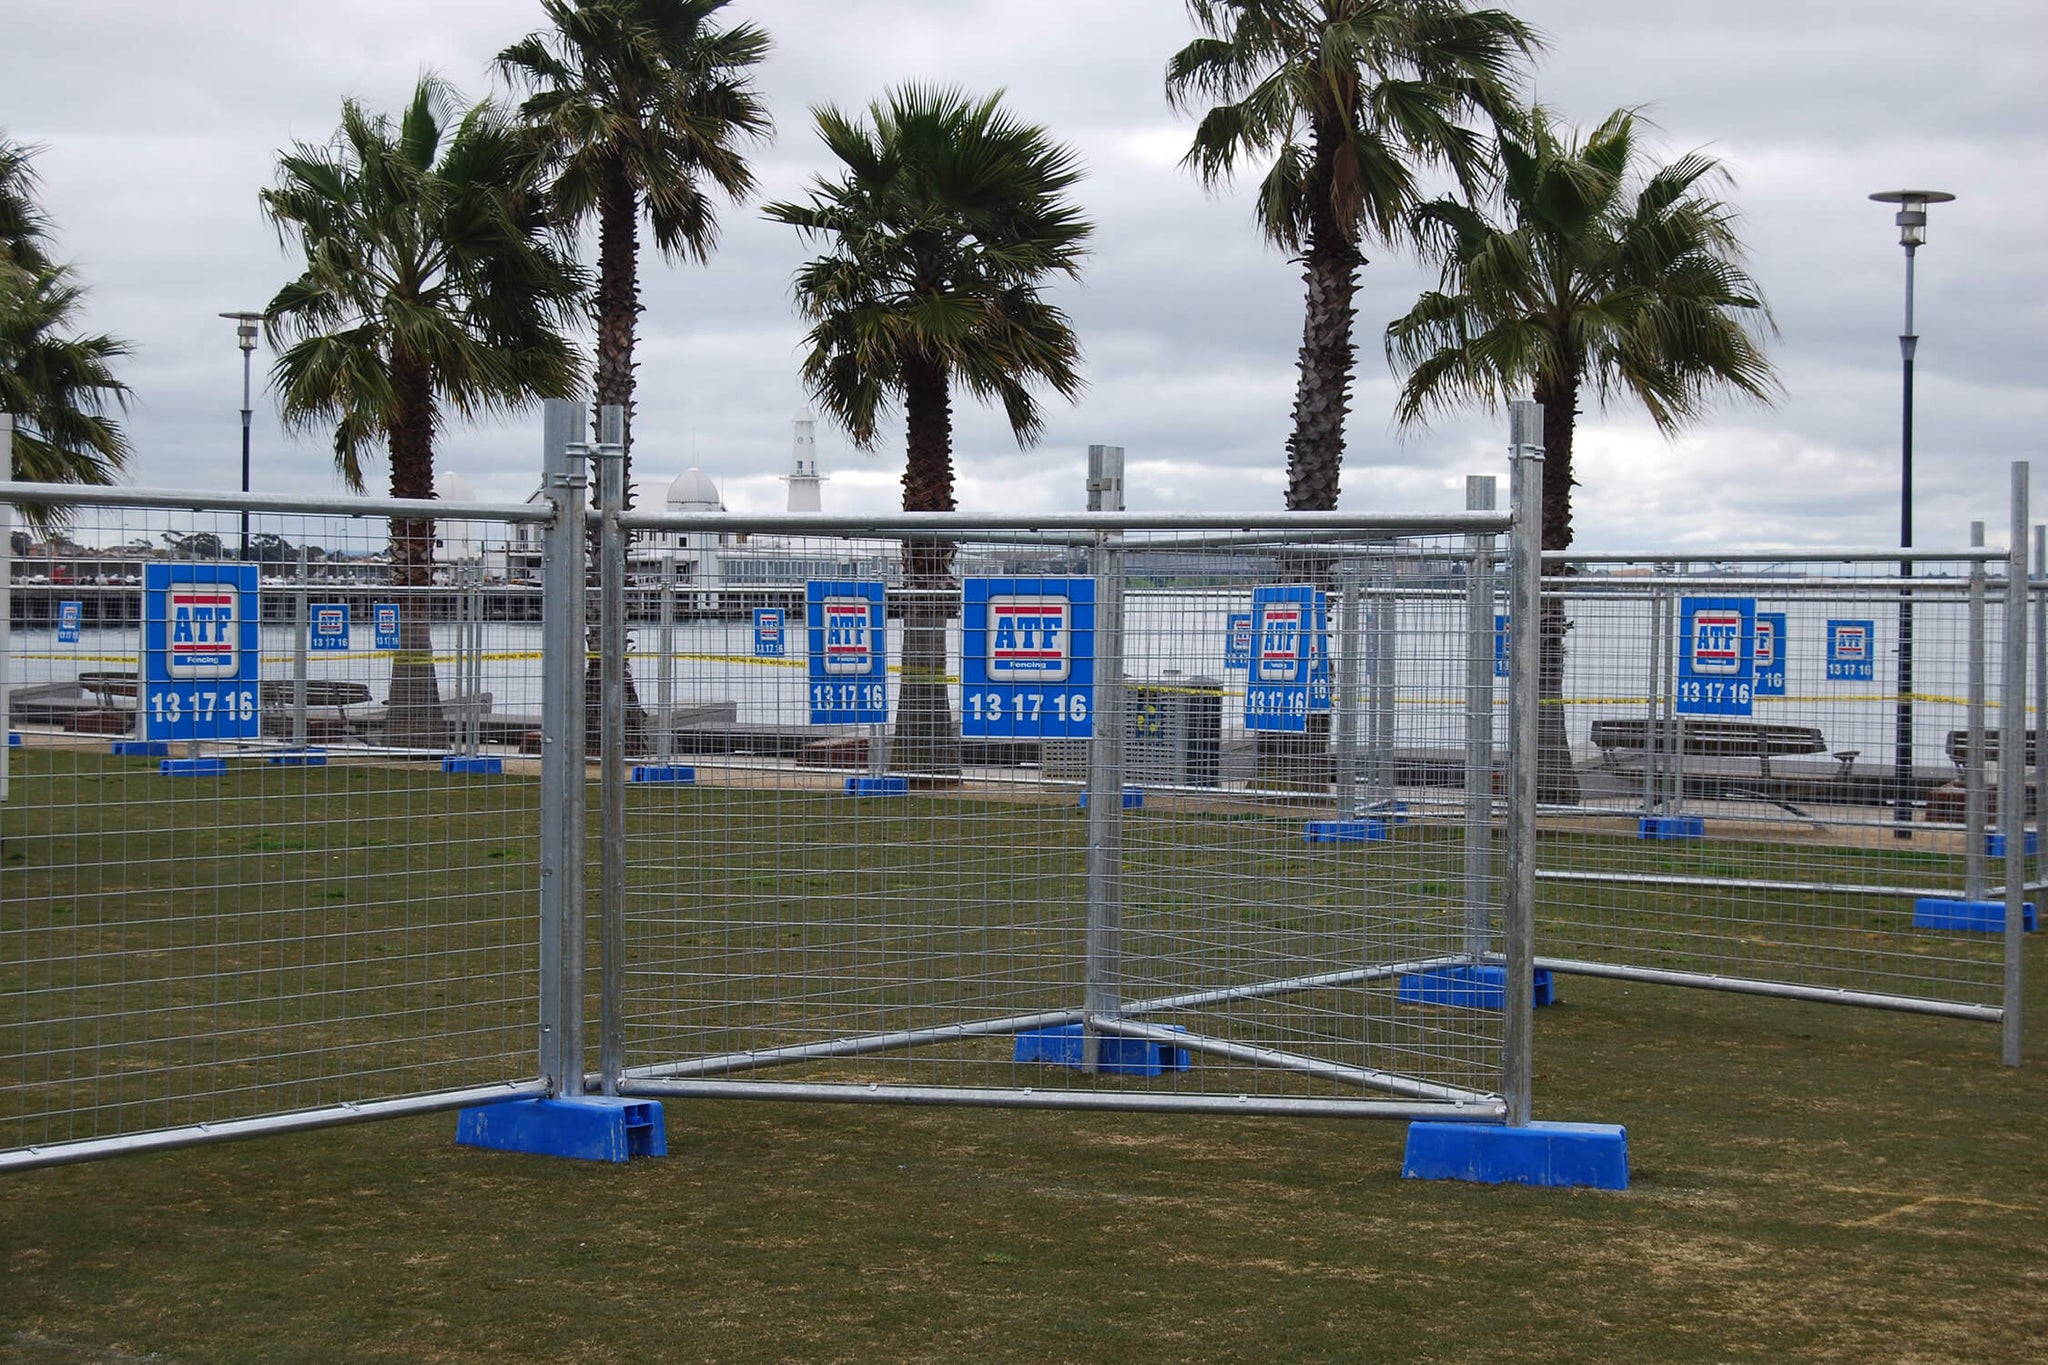 Additional Fencing Products - stop wind blowing over temporary fences.